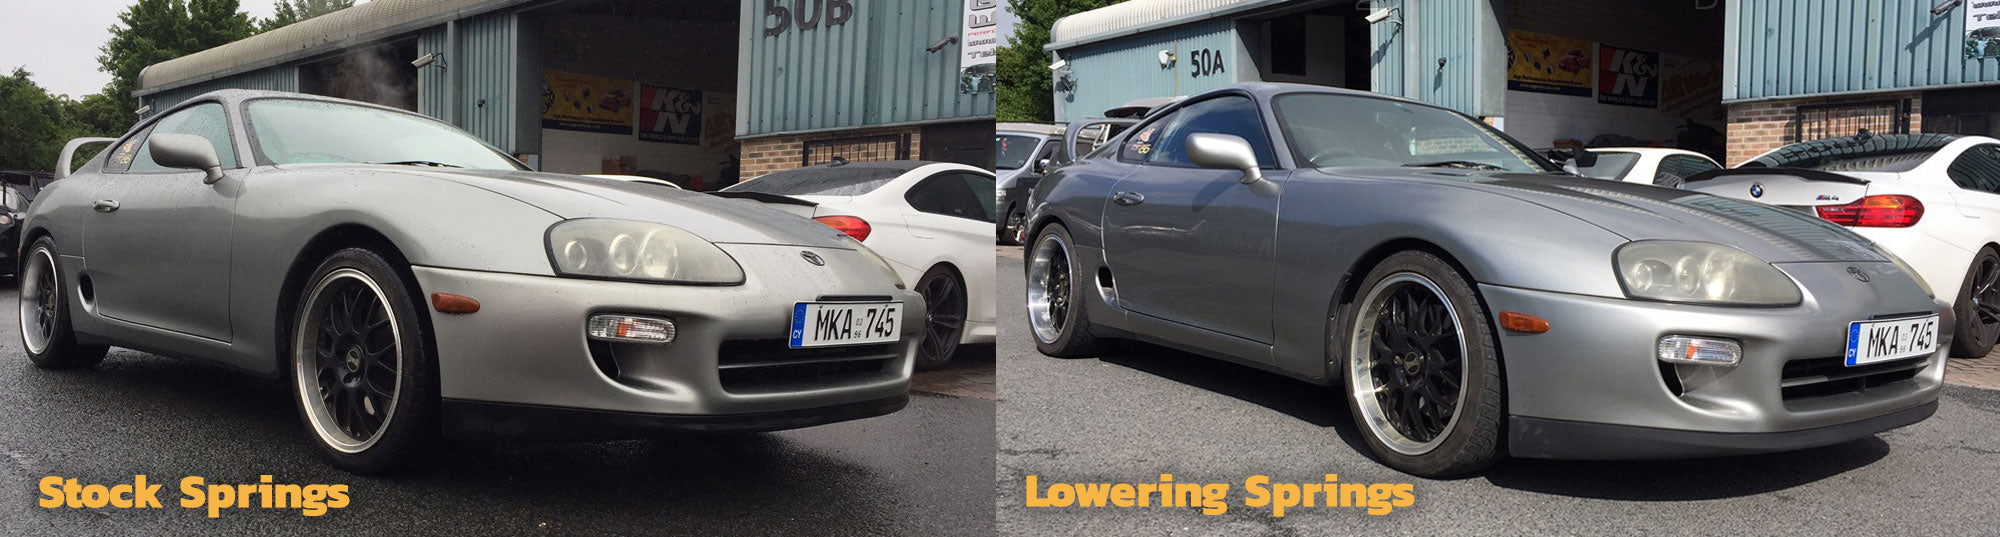 Toyota Supra before and after lowering springs